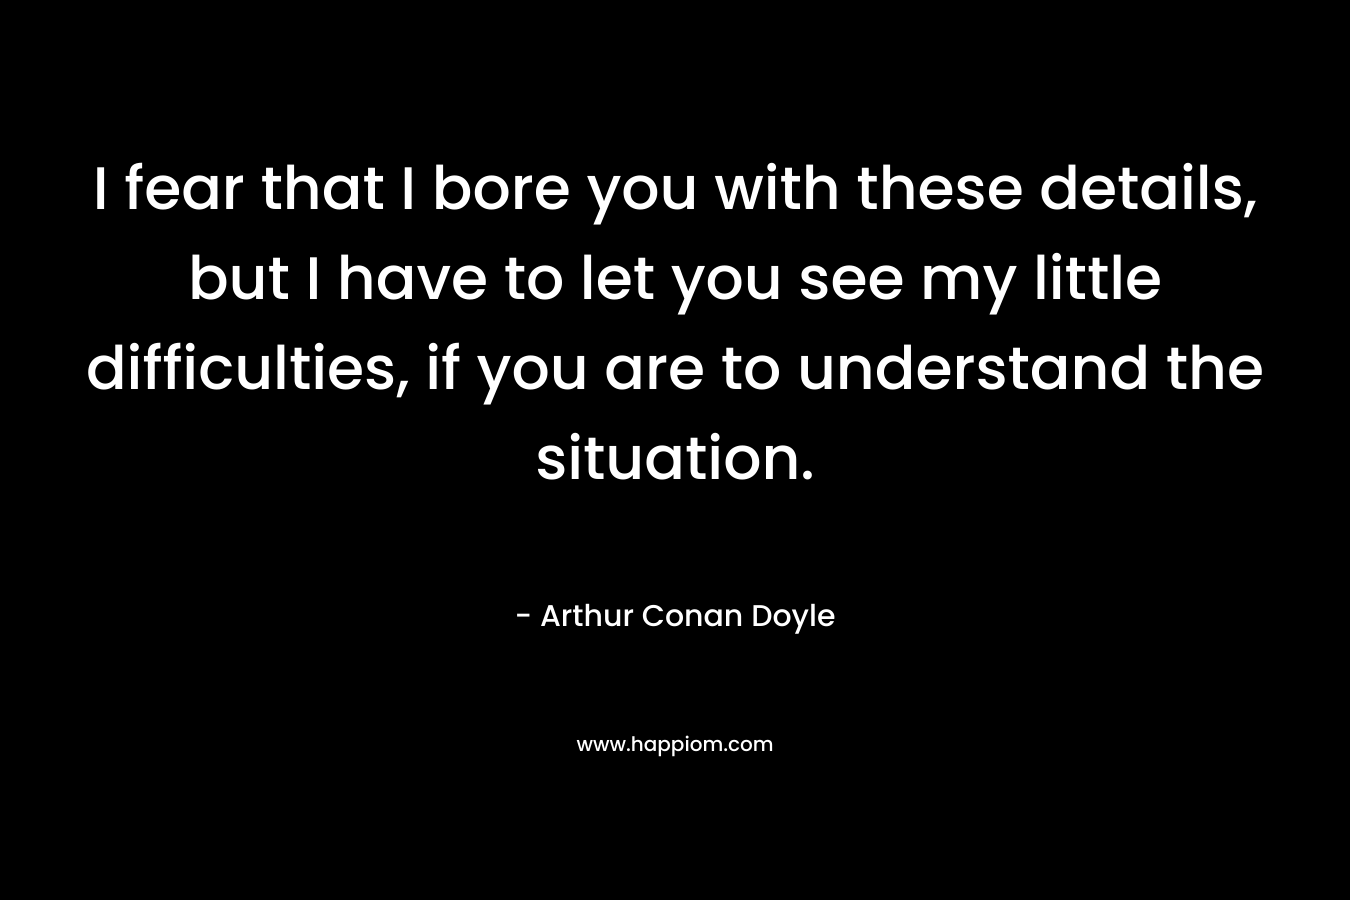 I fear that I bore you with these details, but I have to let you see my little difficulties, if you are to understand the situation. – Arthur Conan Doyle